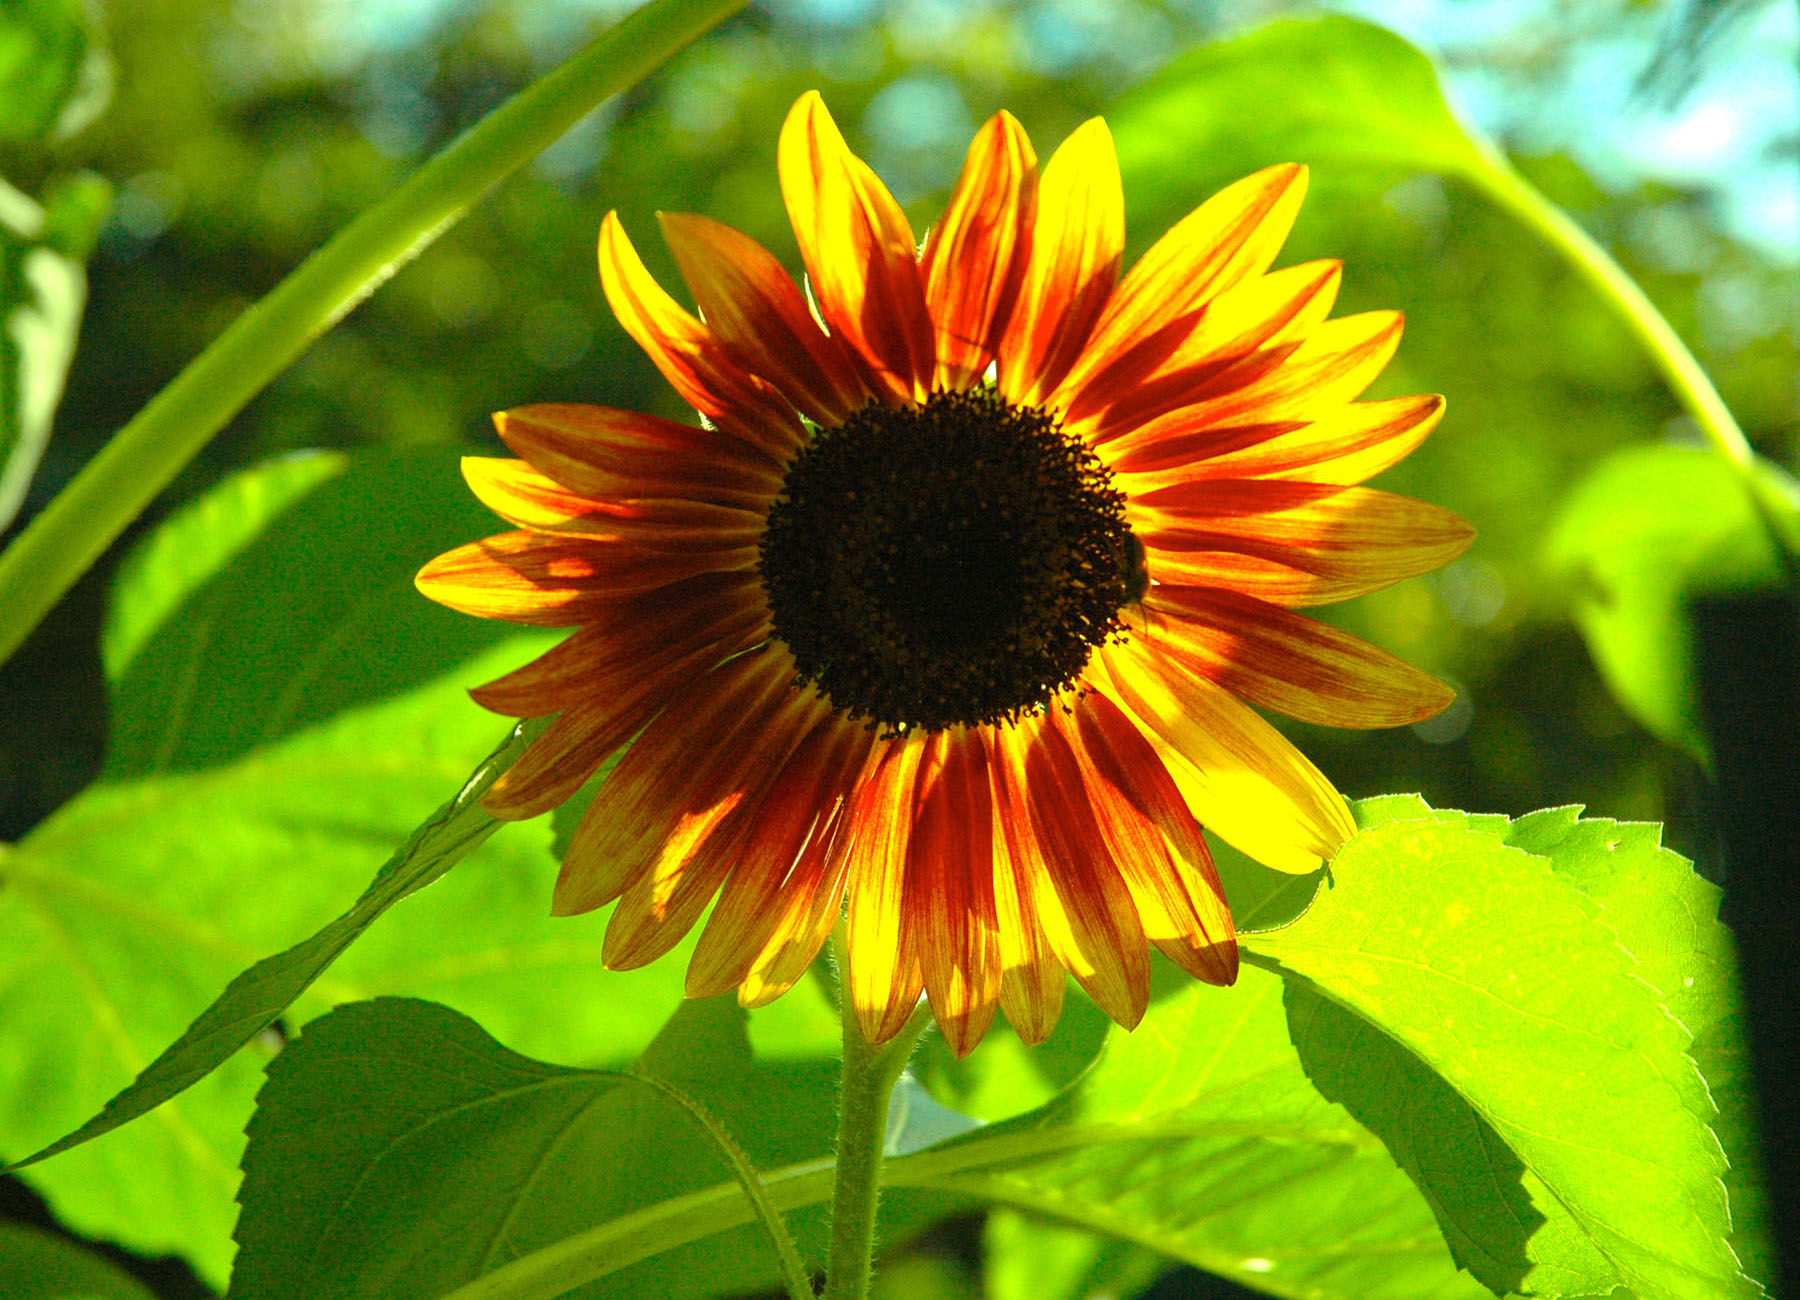 "Stained Glass" Sunflower